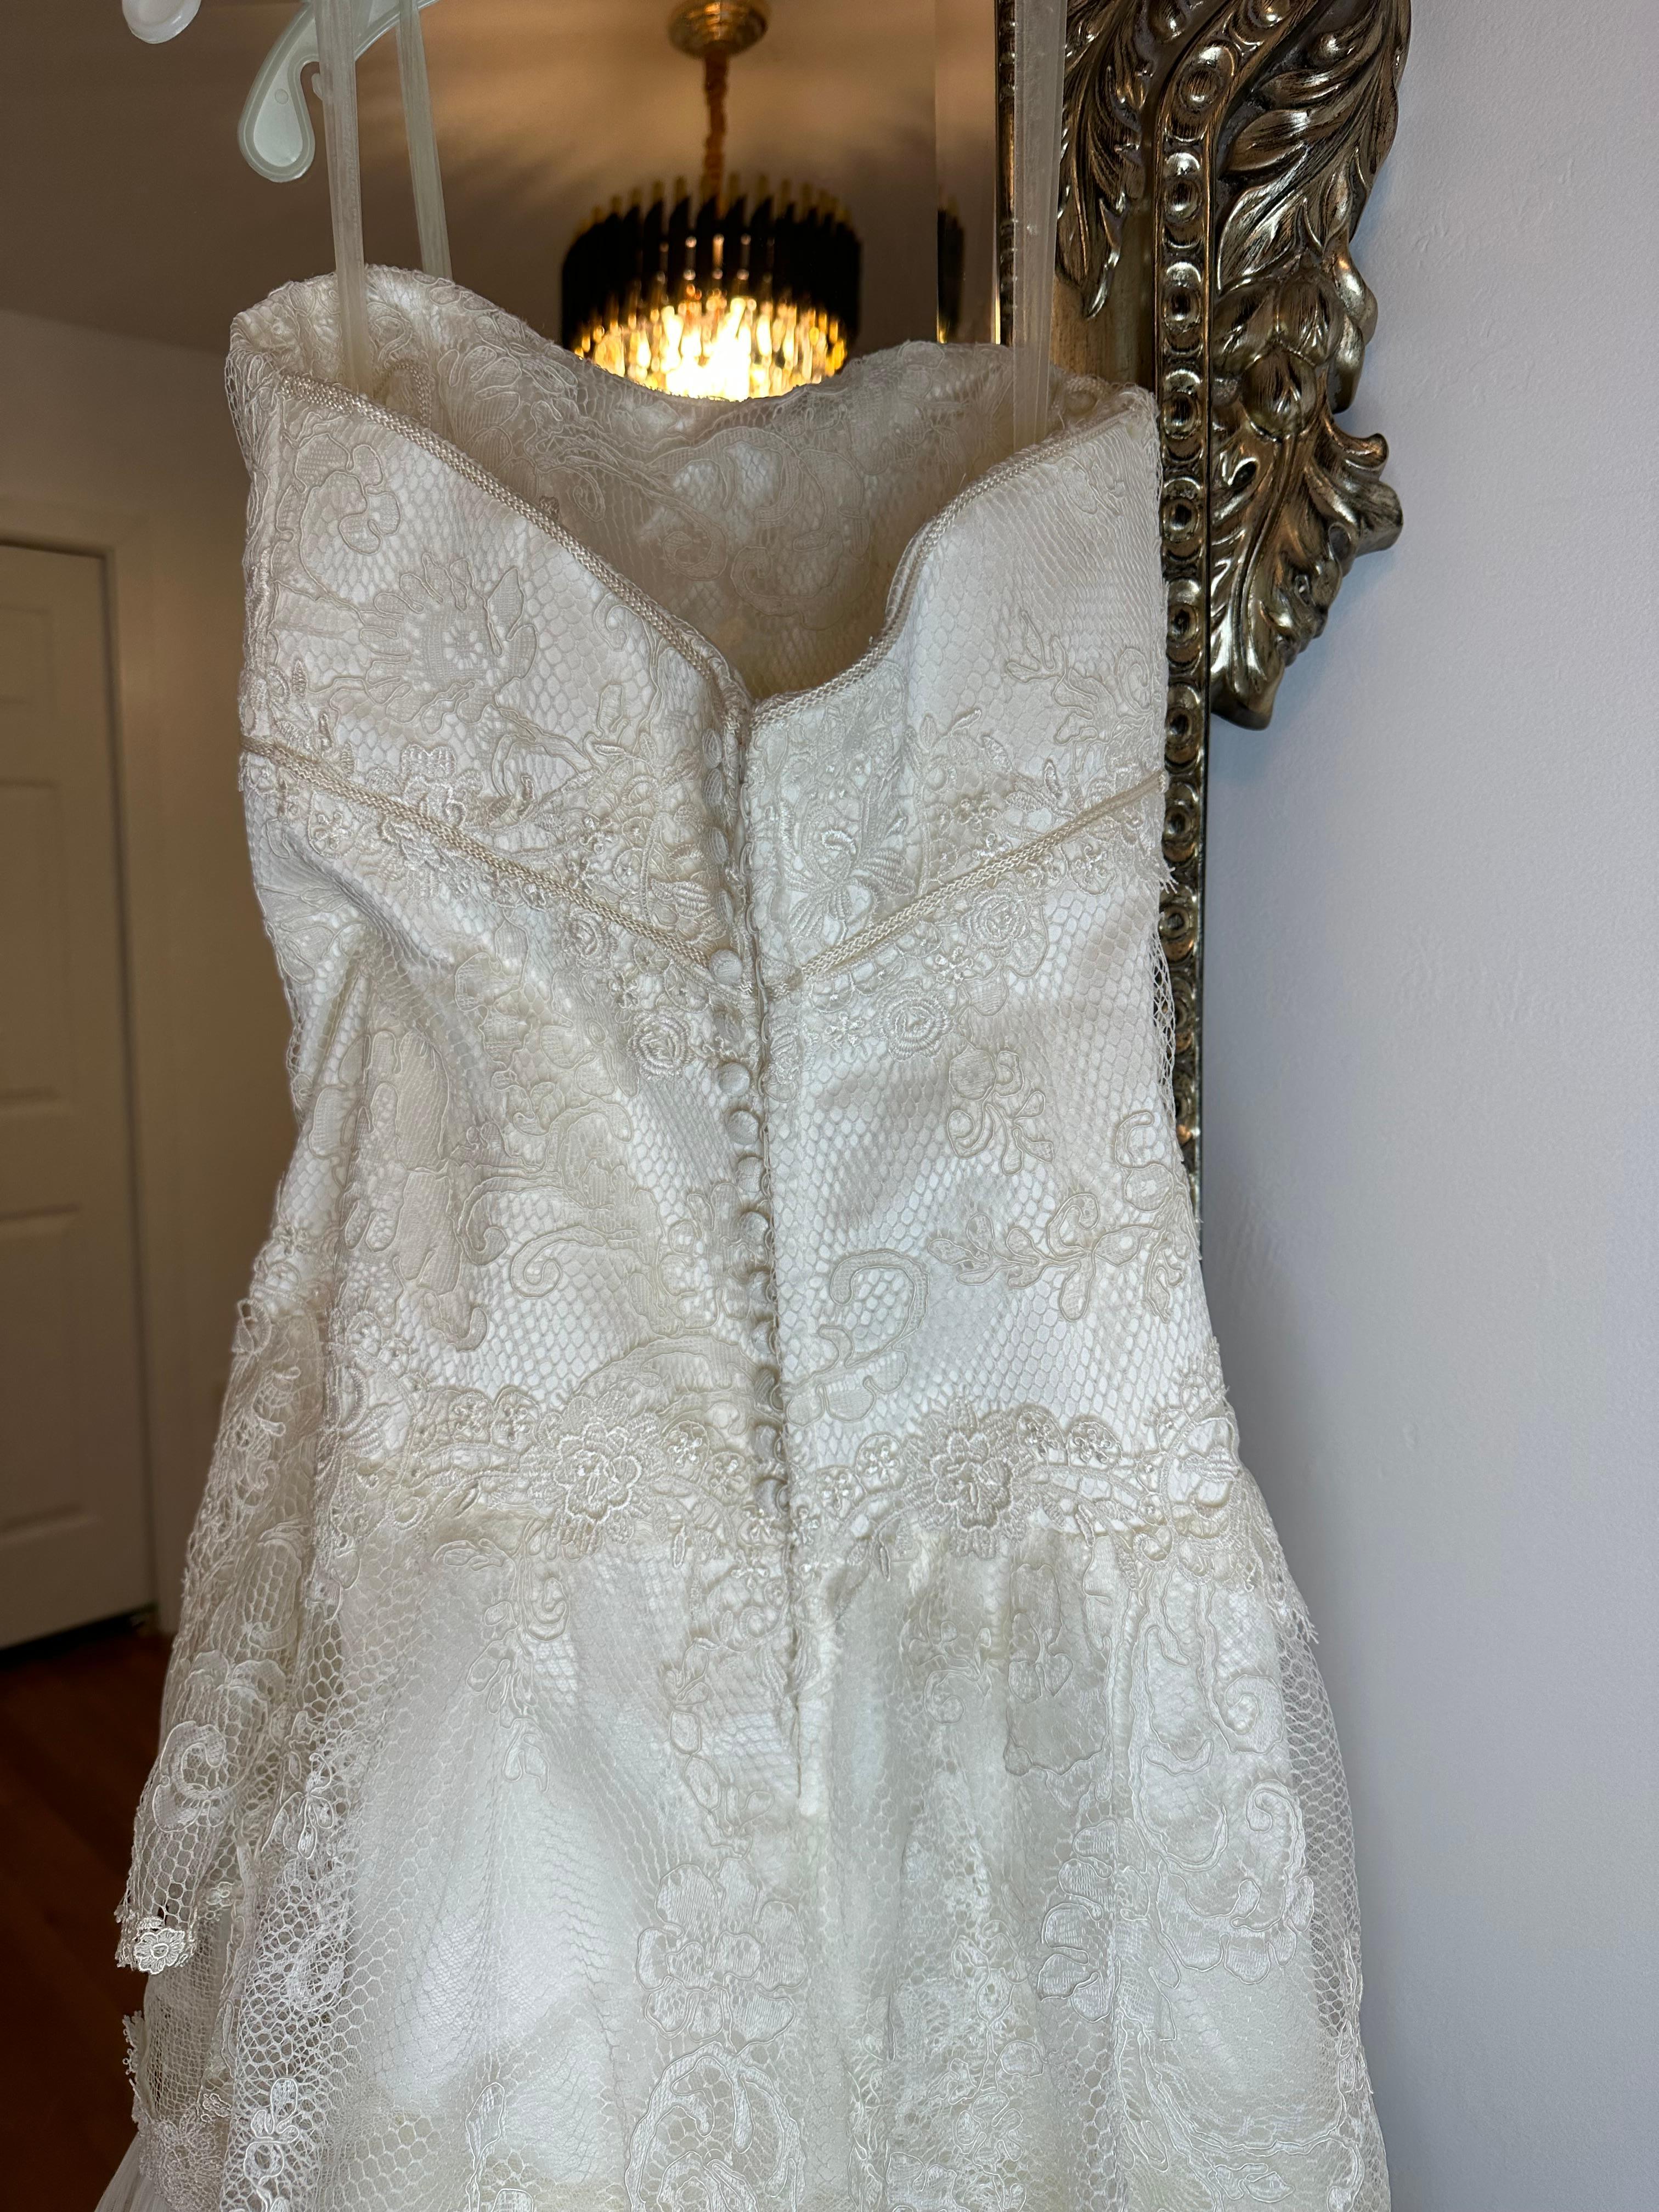 Dolce Gabbana 1990’s lace wedding gown  In Good Condition For Sale In Annandale, VA